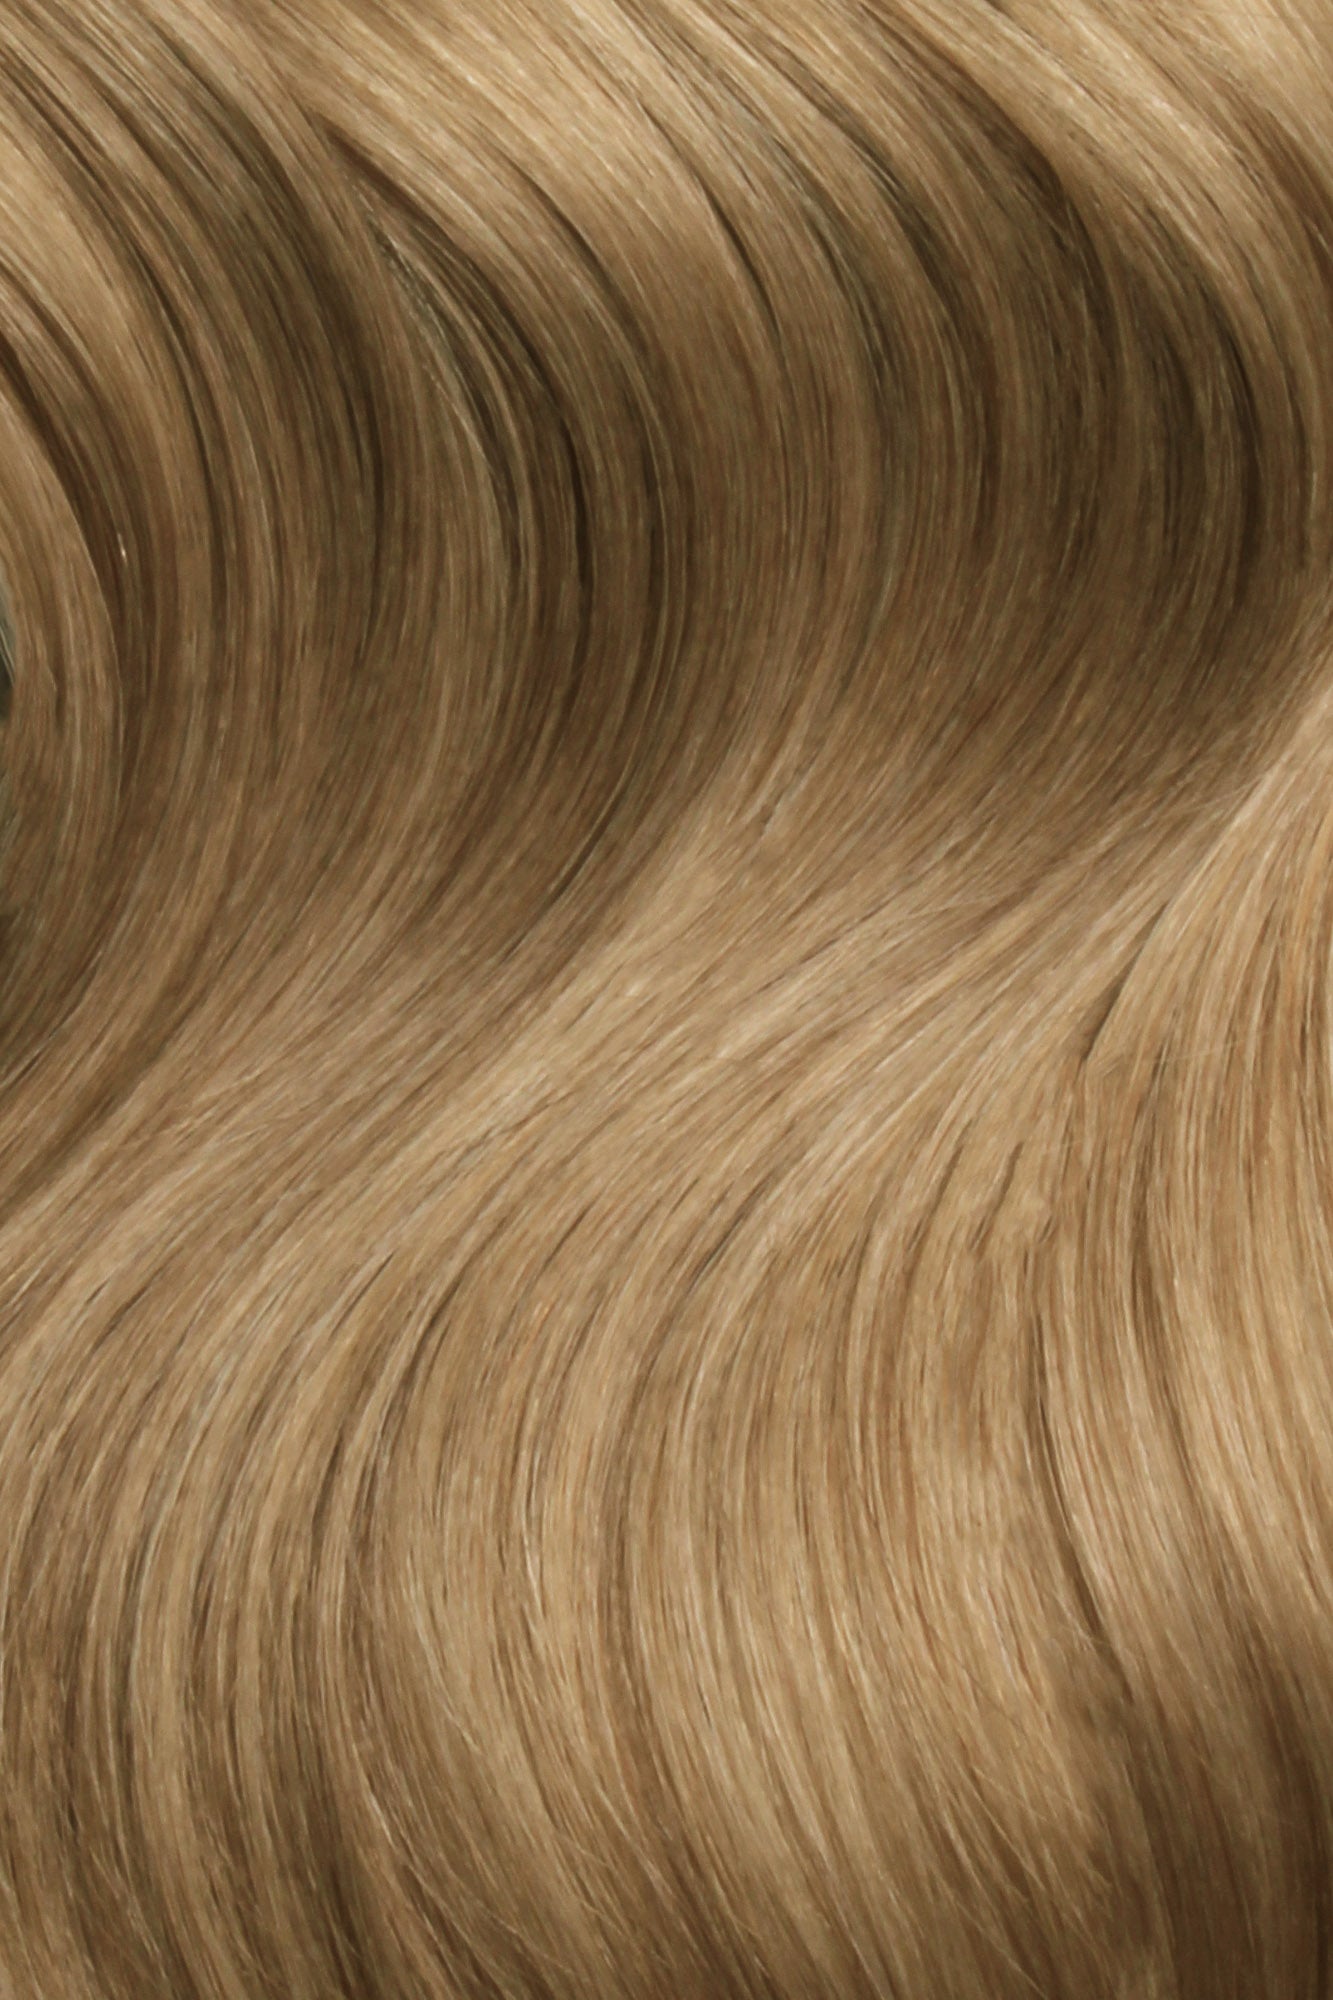 SEAMLESS® Flat Weft 16 Inches - SWAY Hair Extensions Champagne-Chestnut-8-22 Natural SEAMLESS® Flat Weft 16 Inches extensions. Thin, flexible, and discreet. 100% Double Drawn Remy Human Hair. Versatile and reusable